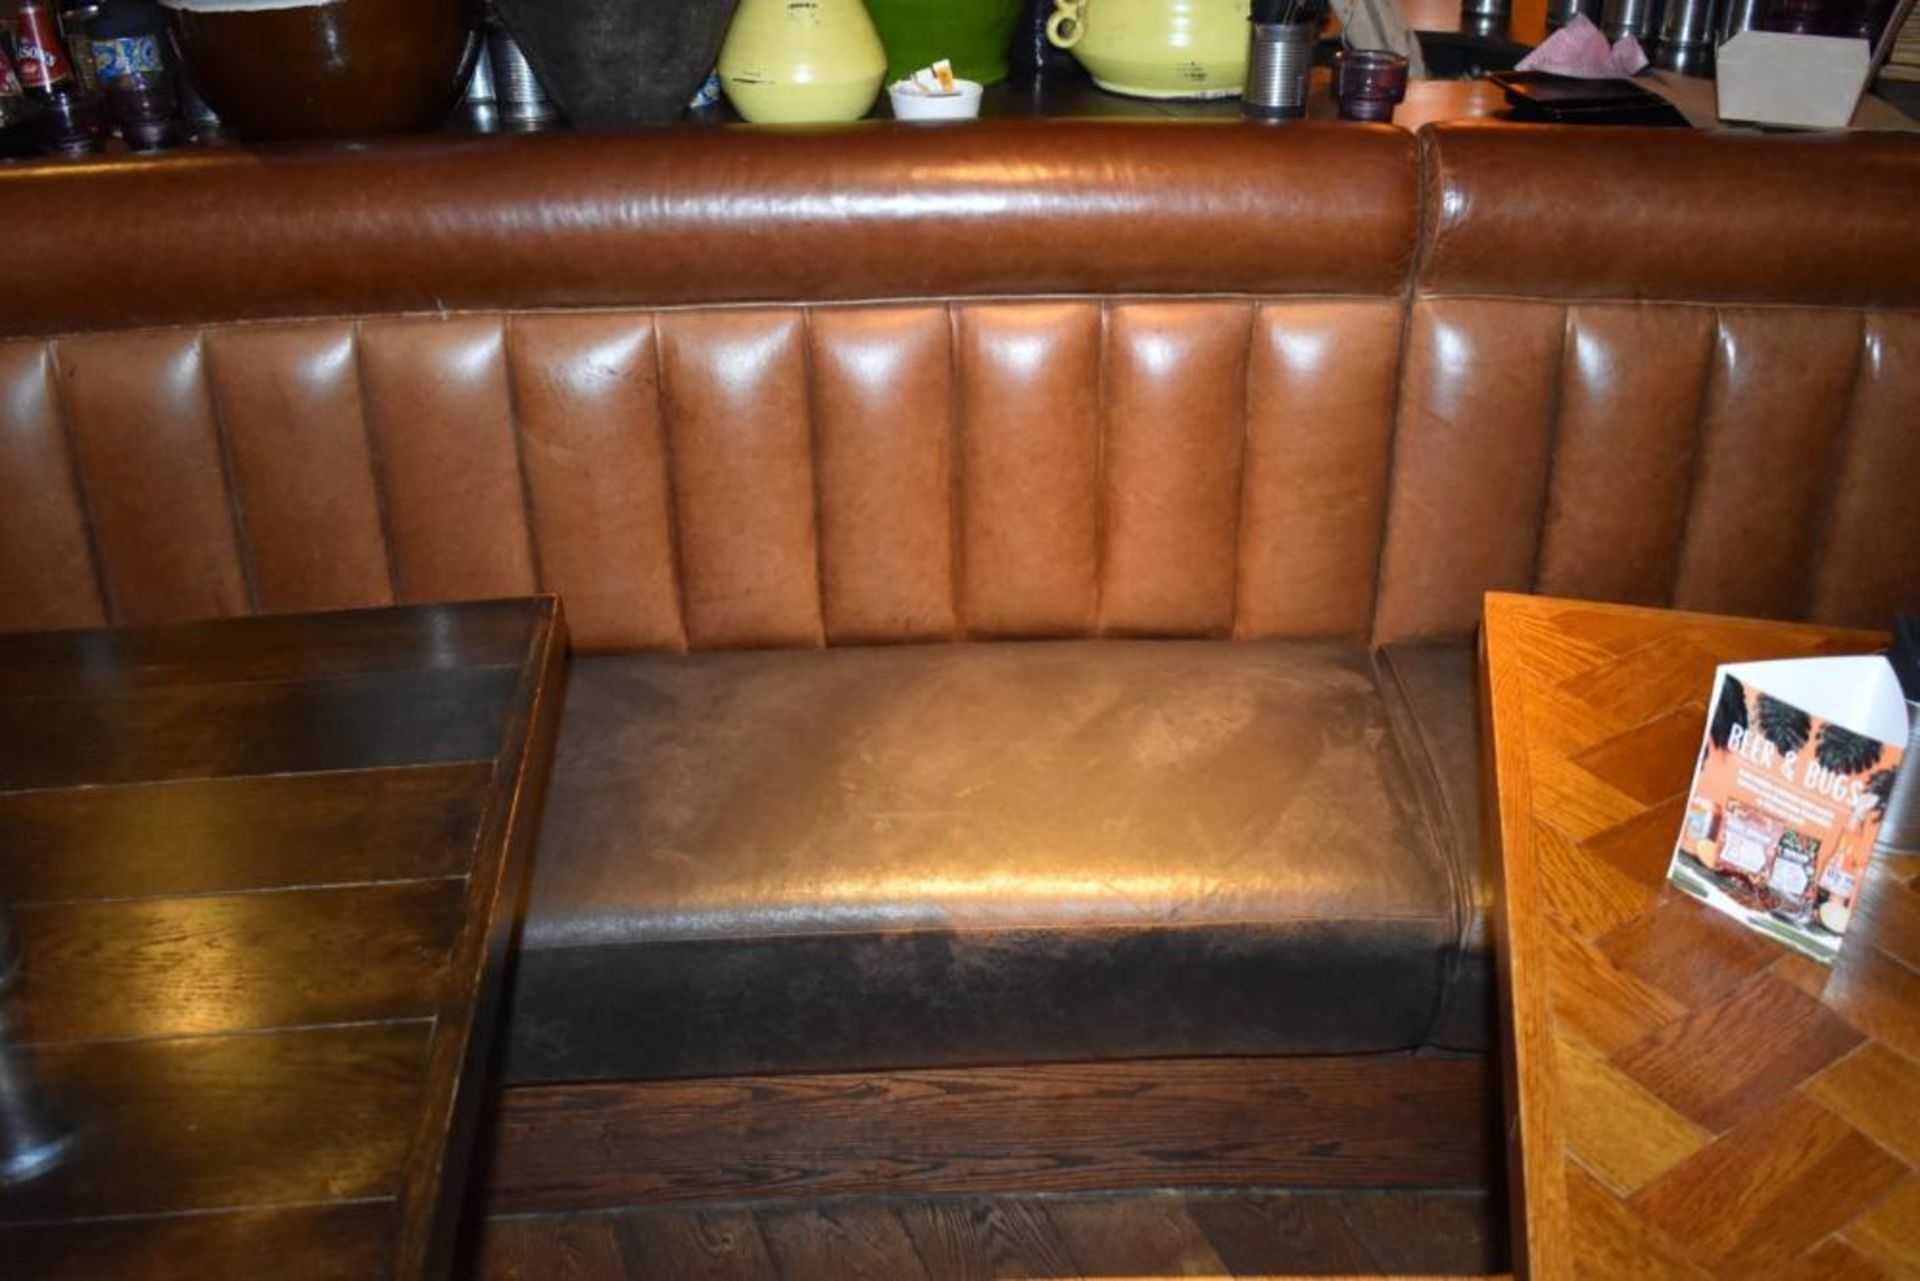 1 x Long Curved Seating Bench From Mexican Themed Restaurant - CL461 - Ref PR891 - Location: London - Image 5 of 14